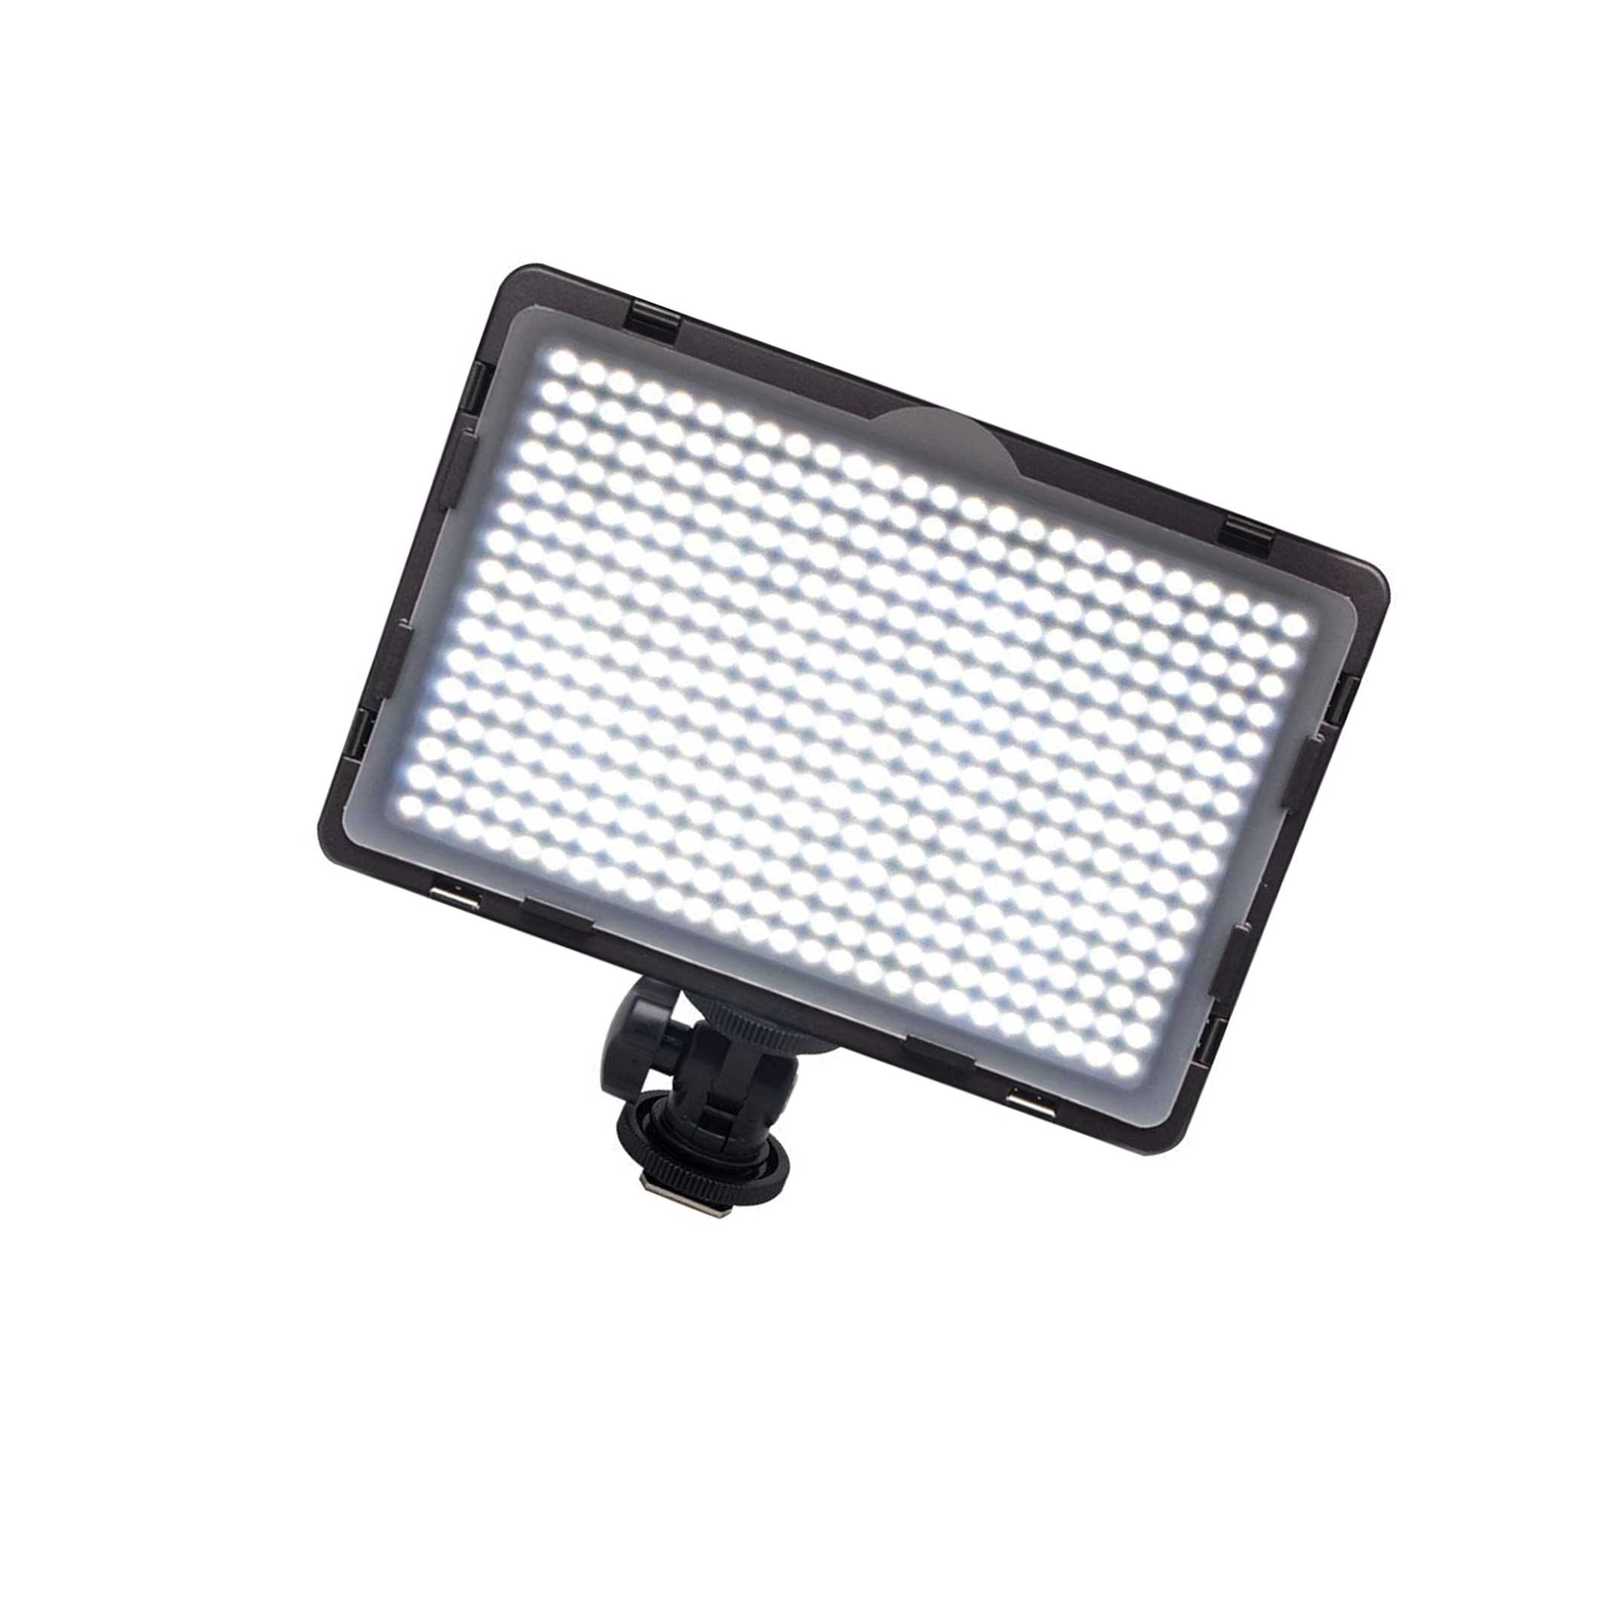 EPDJ Products Slim Series A Led Panels For Sony Camera Black